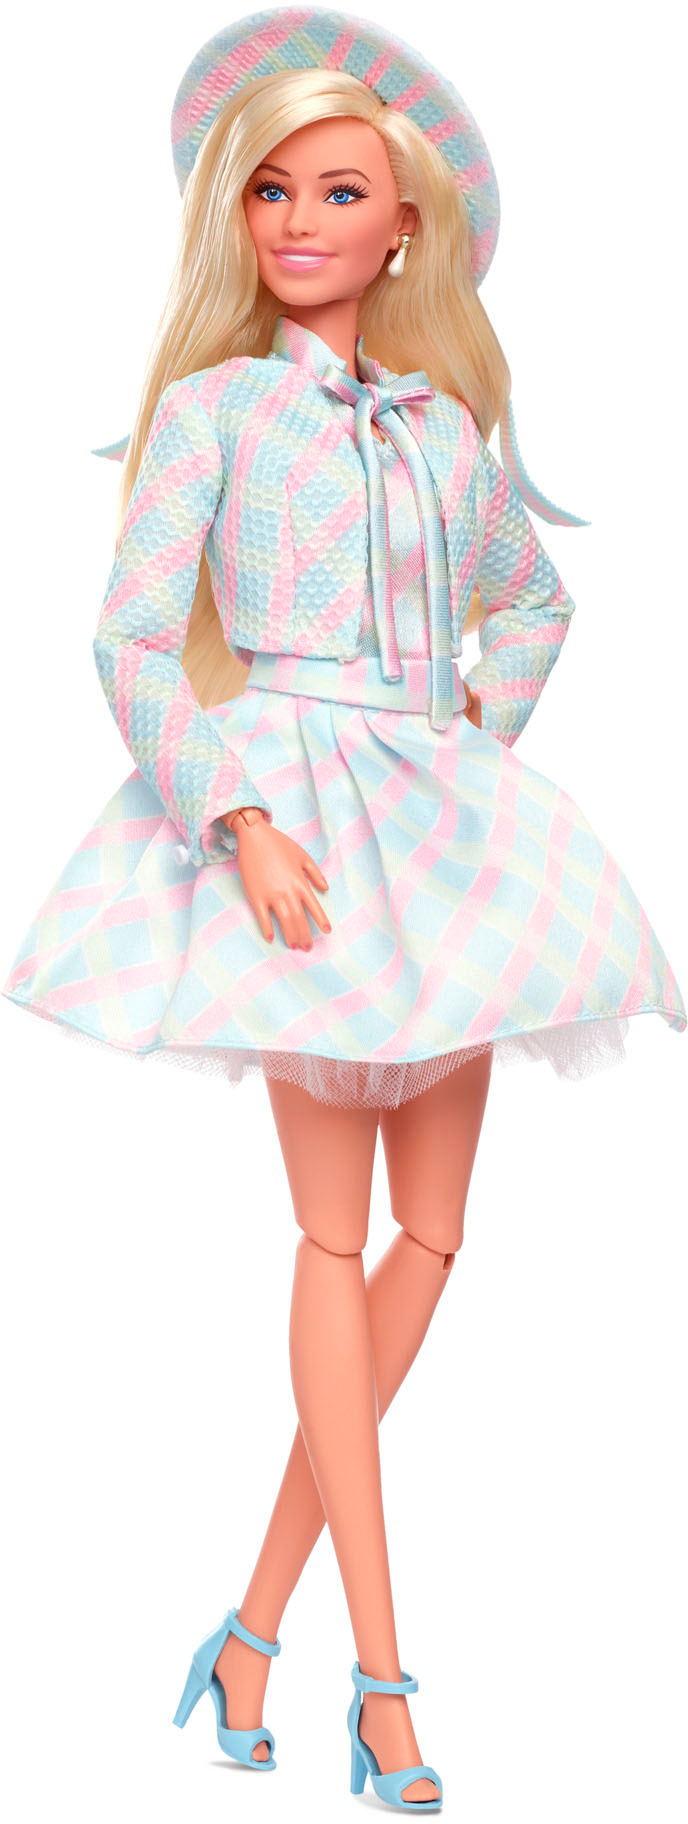 Barbie The 11.5" Doll in Plaid HRF26 - Best Buy